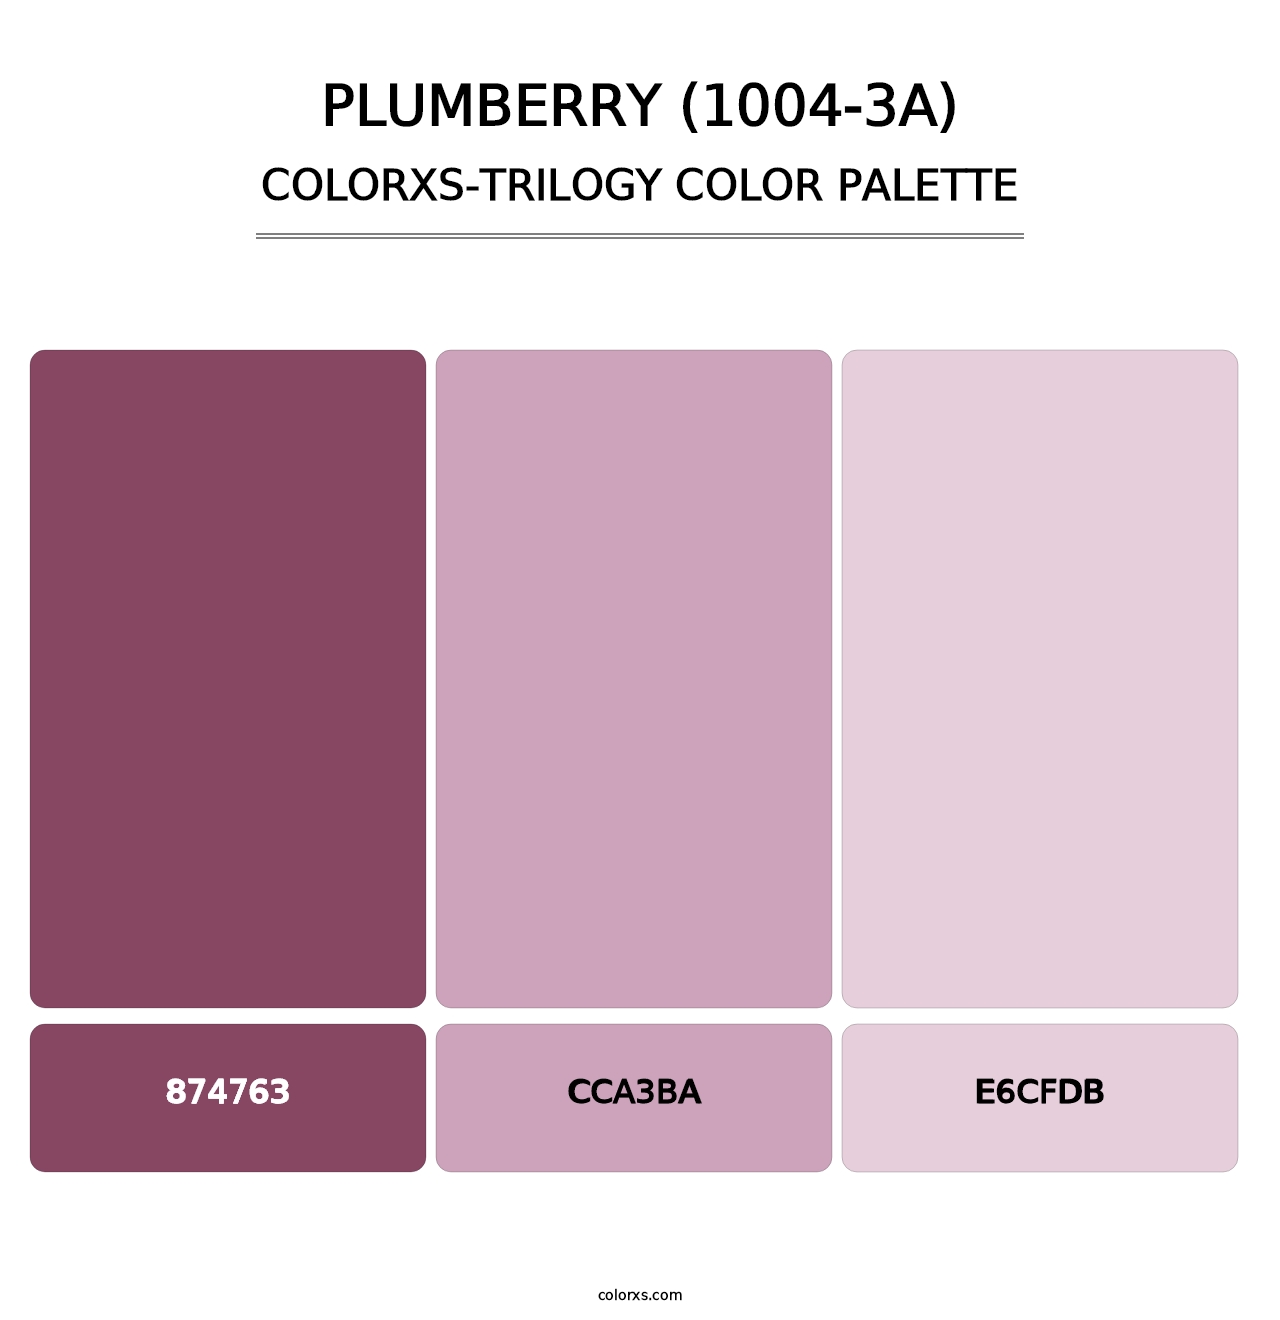 Plumberry (1004-3A) - Colorxs Trilogy Palette